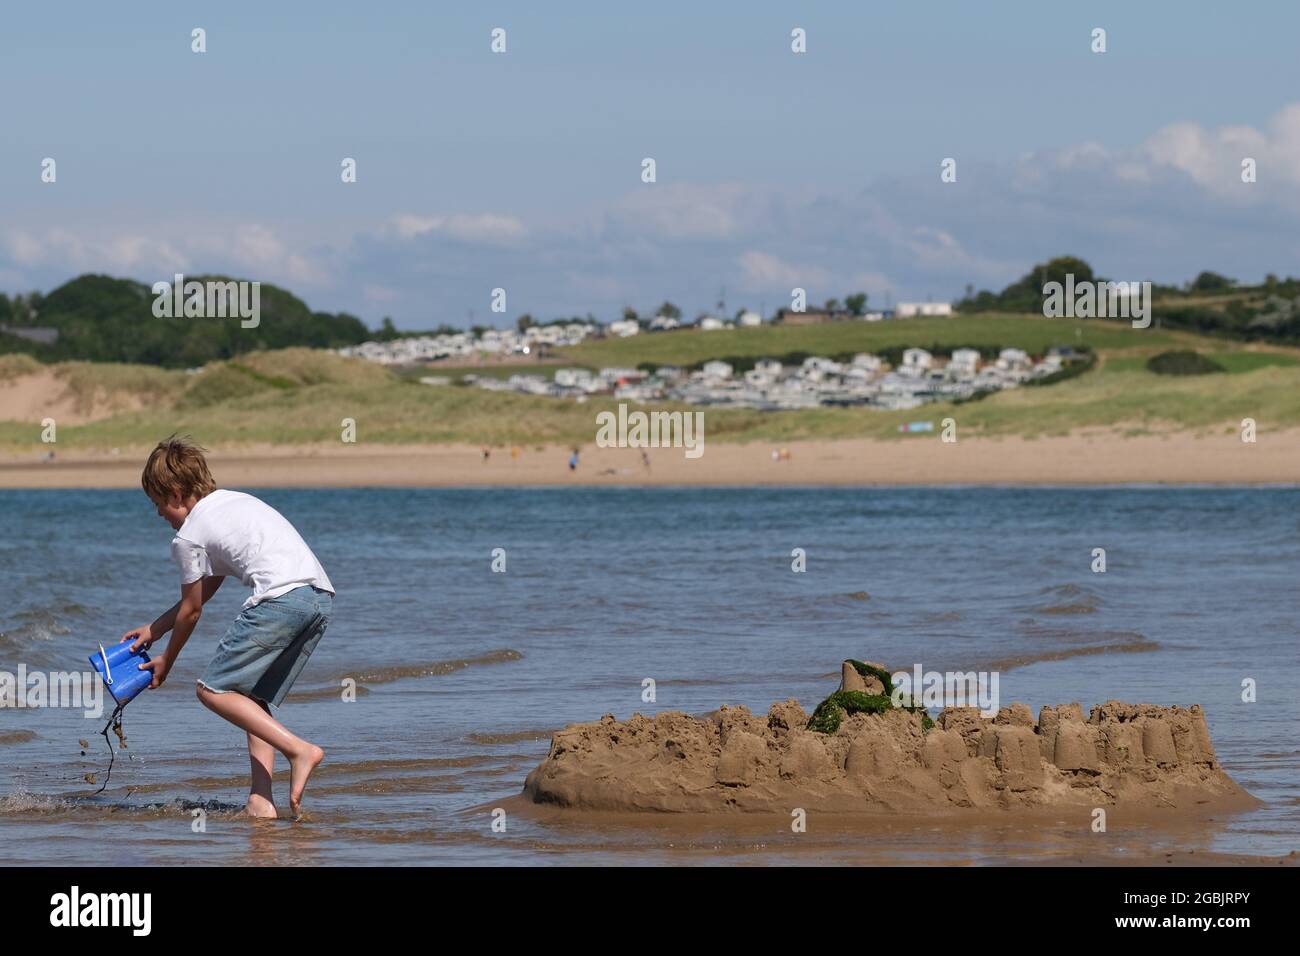 Gower, Swansea, UK. 4th August, 2021.  UK weather: sunny and warm with a light southerly breeze at Broughton beach on the Gower peninsula, as the forecast pedicts wet and  changeable weather in the coming days. A young boy battles to save his sand castle against the incoming tide. Credit: Gareth Llewelyn/Alamy Live News Stock Photo